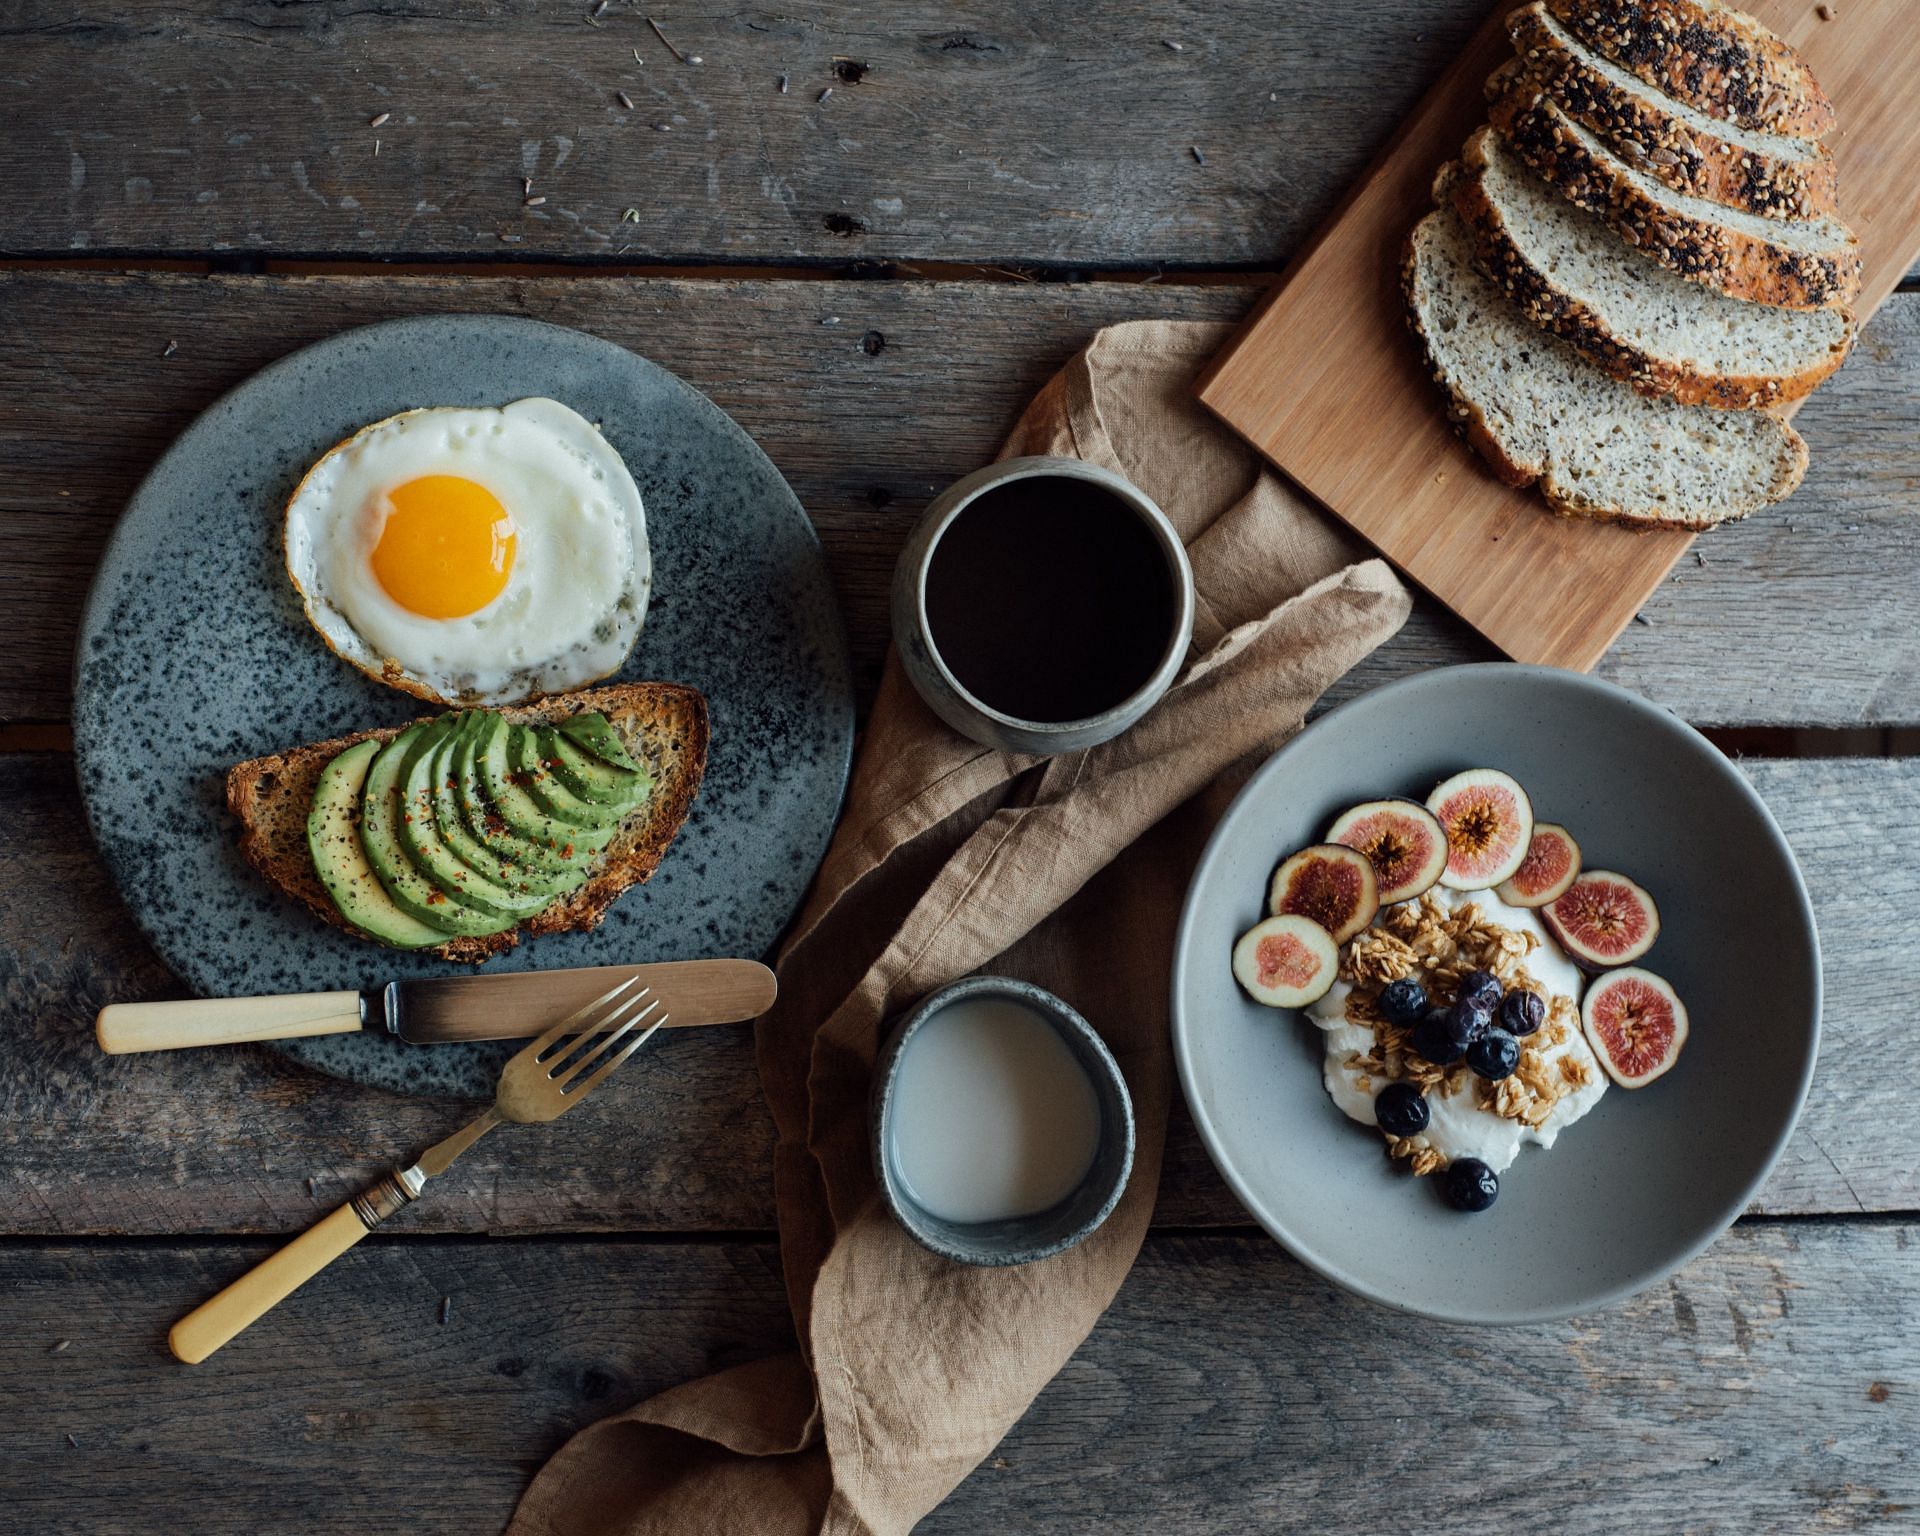 The decision to follow the Paleo or Keto diet is a personal one. (Photo via Pexels/Daniela Constantini)